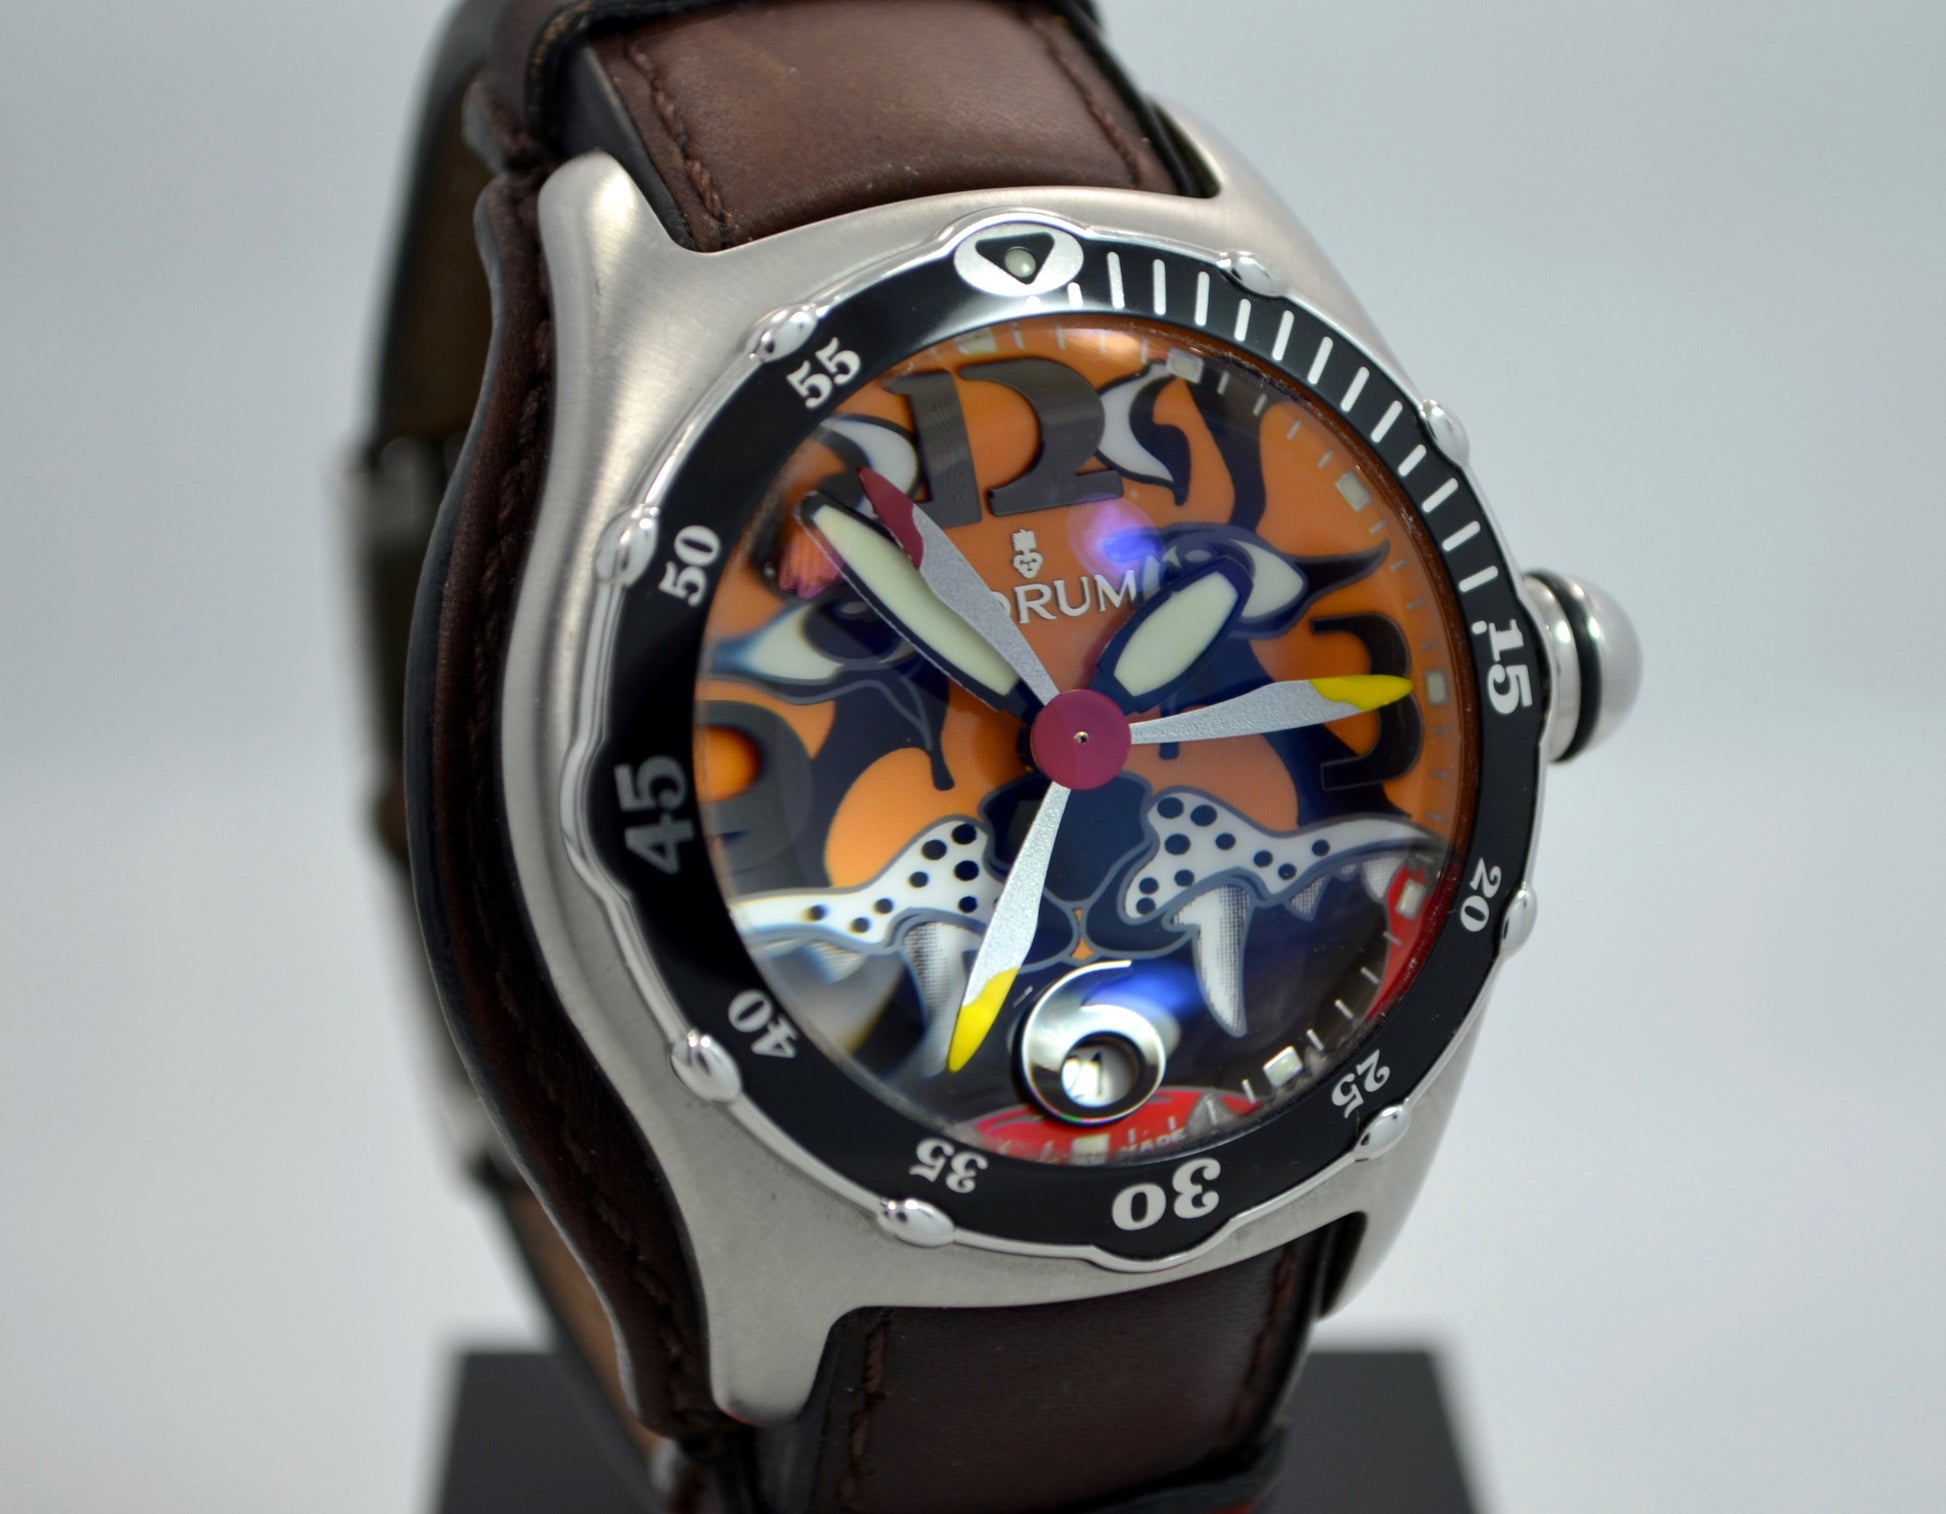 CORUM BUBBLE DIVE BOMBER TIGER AUTOMATIC LIMITED EDITION 82.180.20 2004 WATCH - Hashtag Watch Company